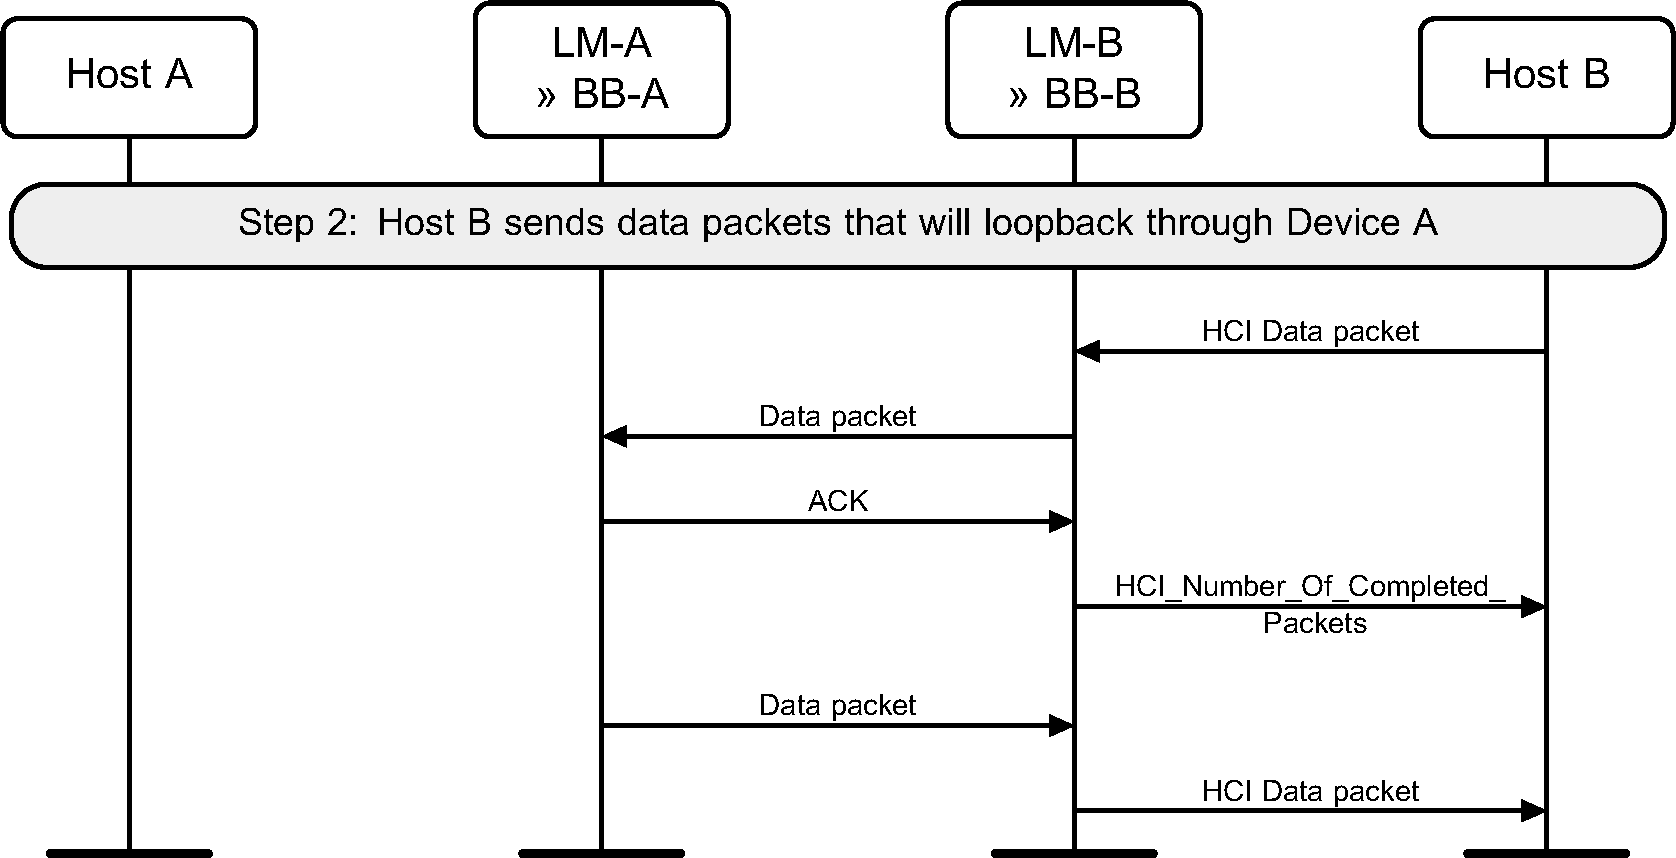 Looping back data in Remote Loopback mode